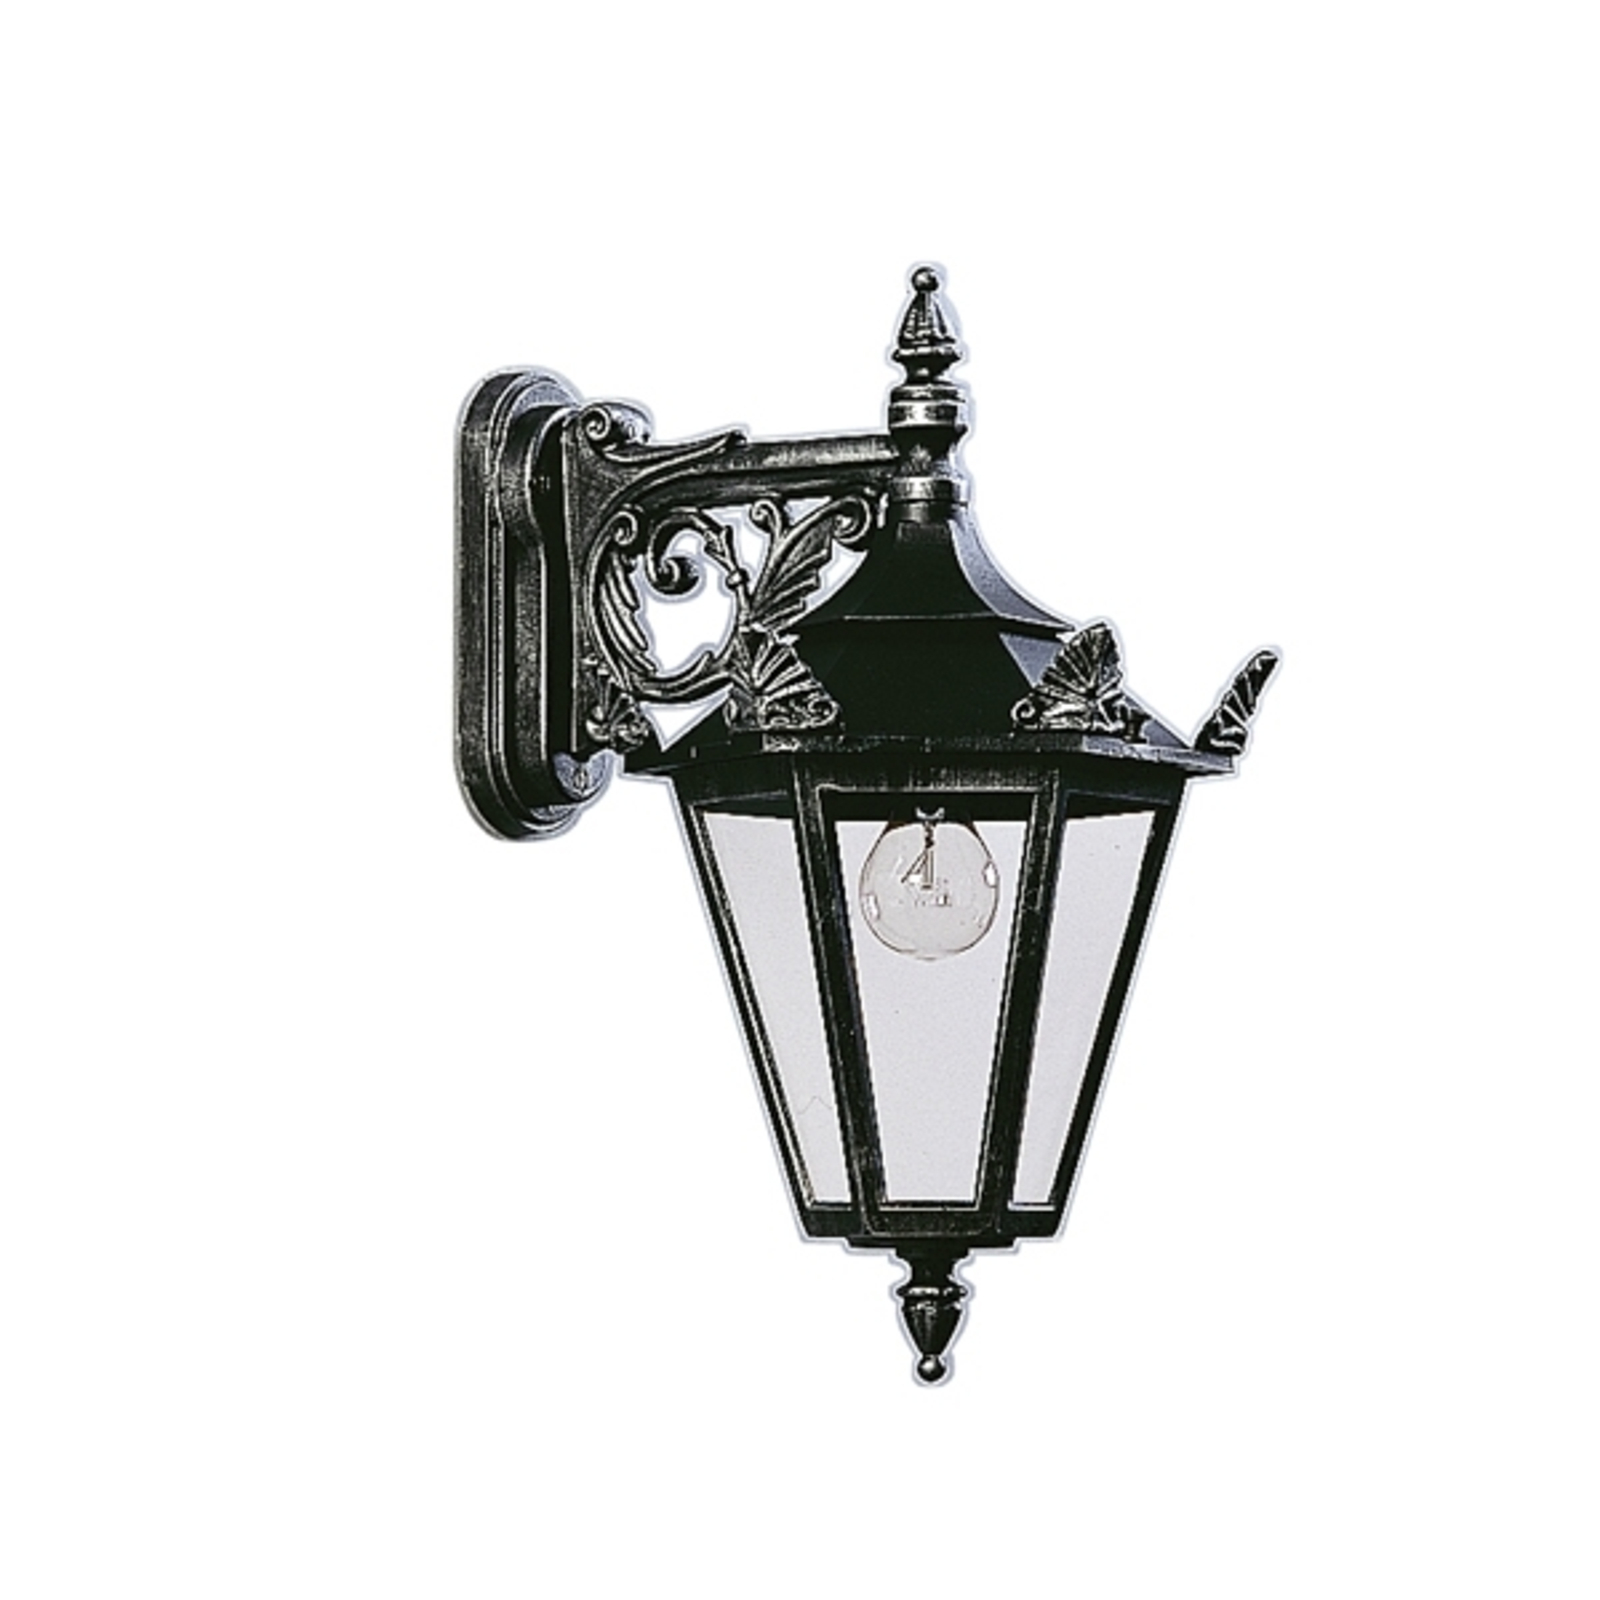 Country house style outdoor wall light 746 S